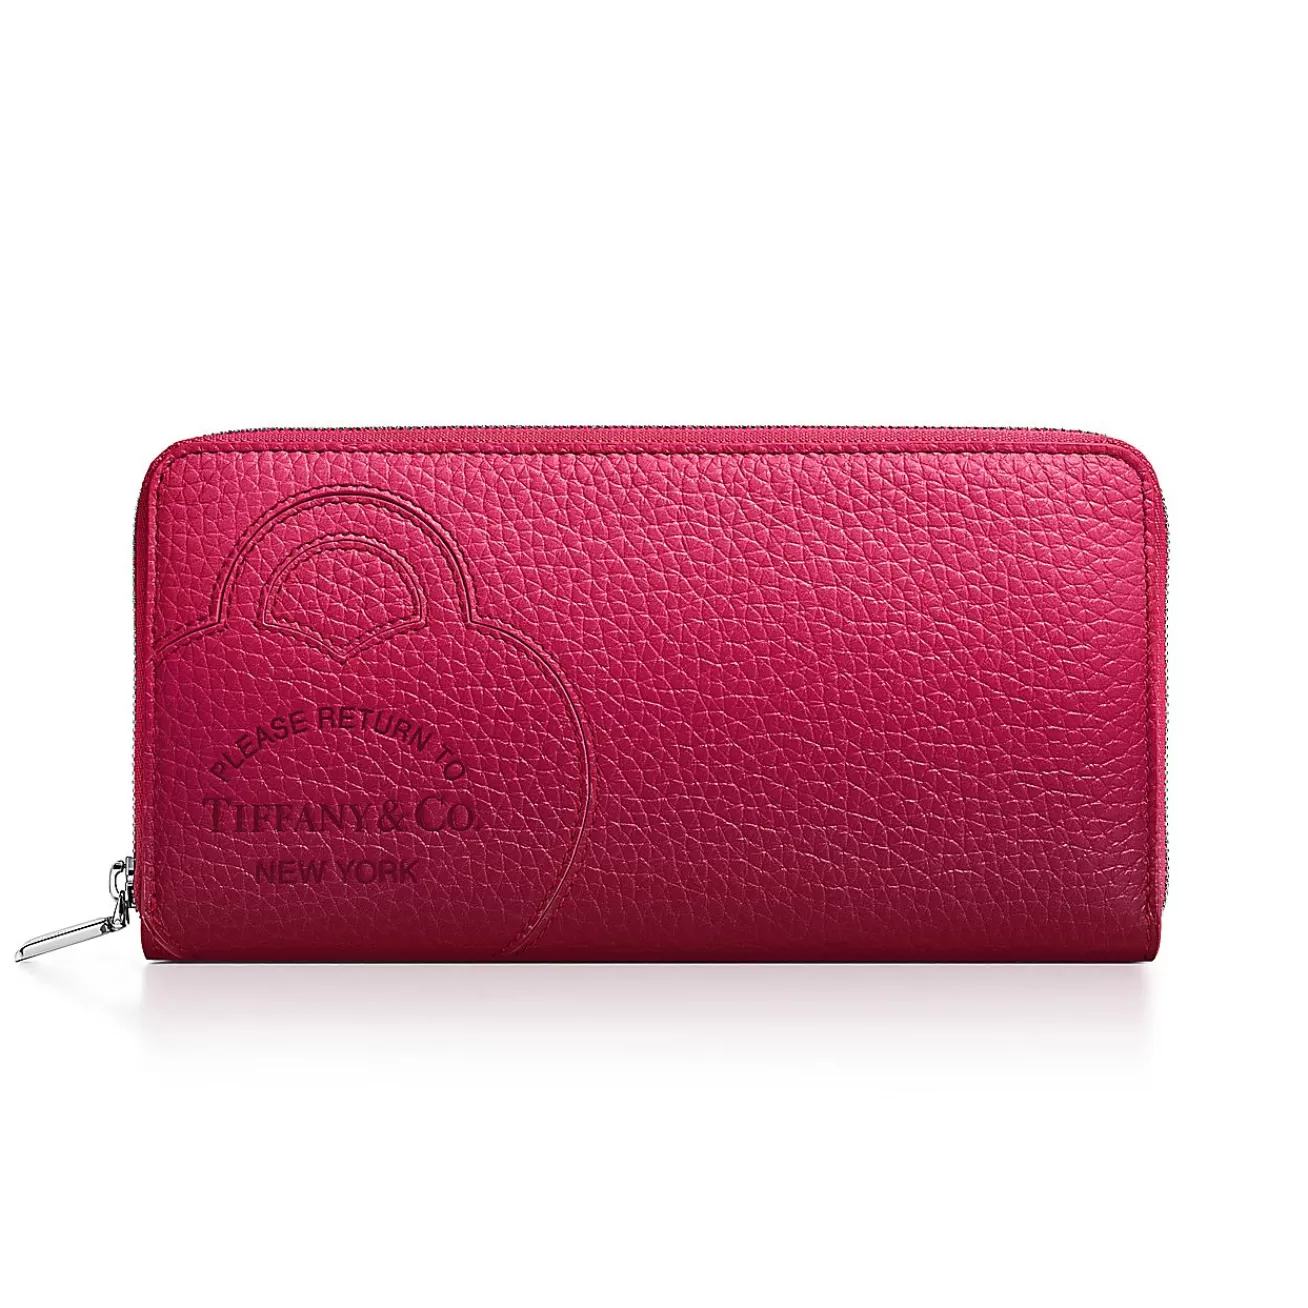 Tiffany & Co. Return to Tiffany® Large Zip Wallet in Infinity Ruby Leather | ^Women Small Leather Goods | Women's Accessories